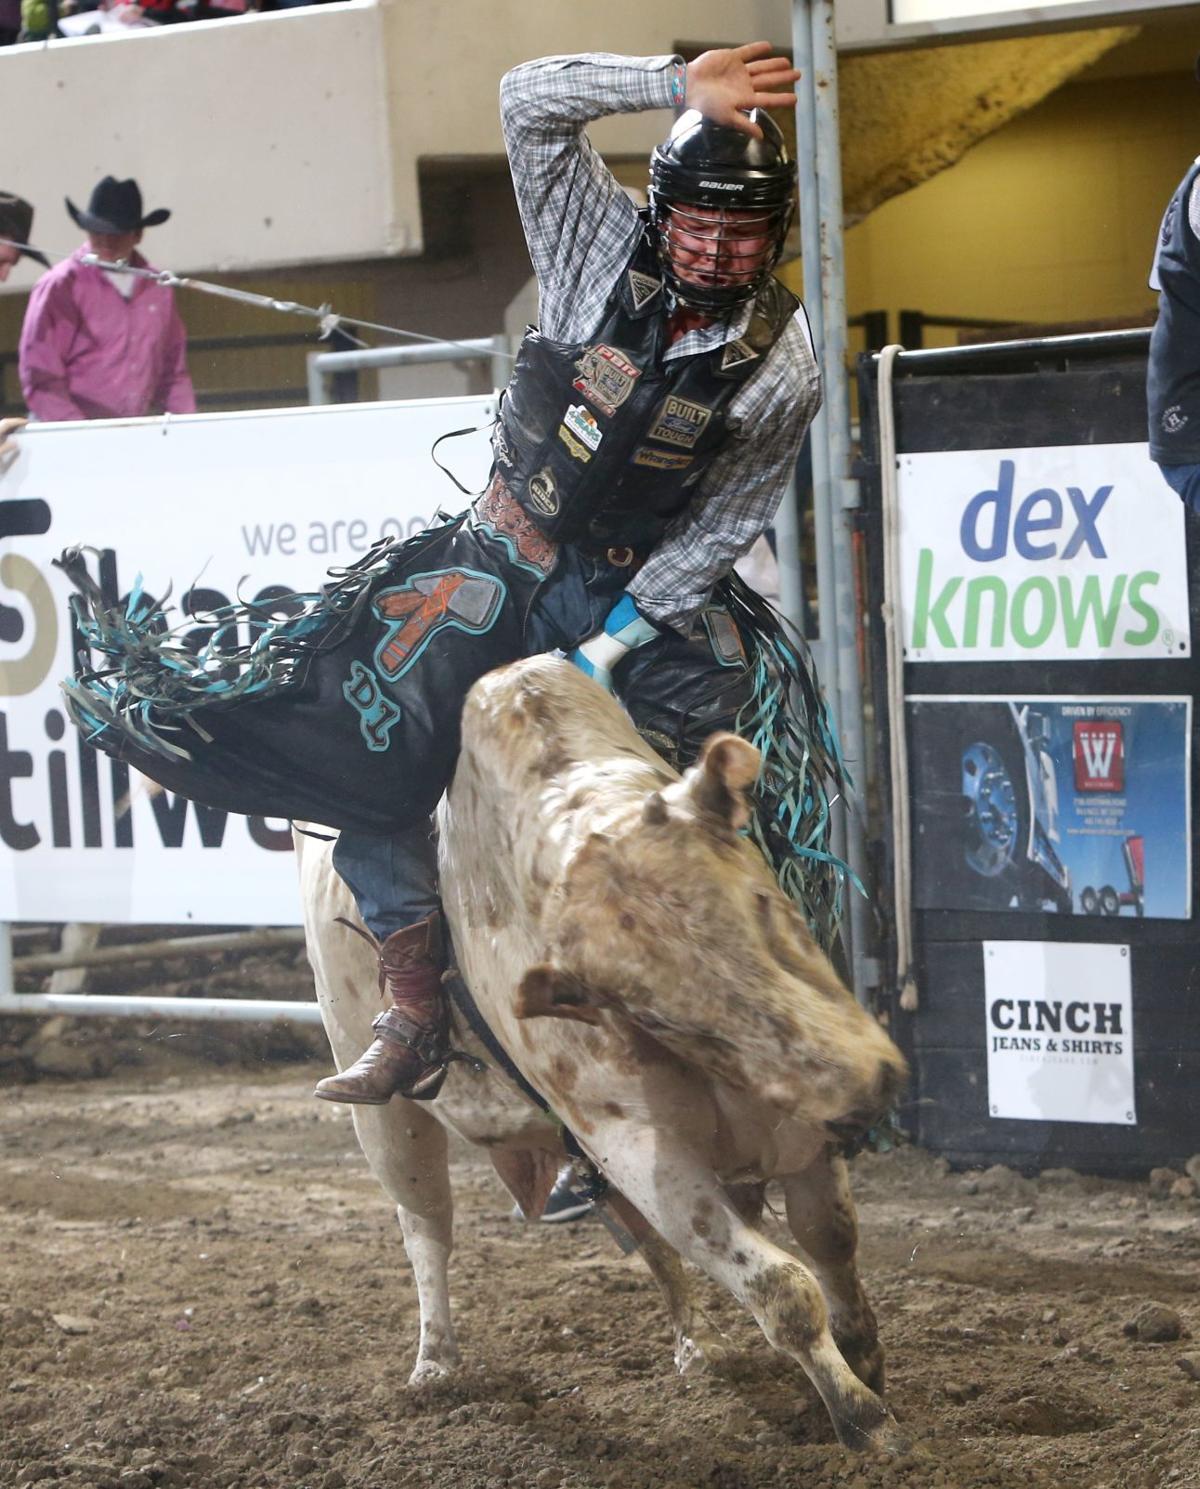 Brody Cress continues hot streak with Chase Hawks saddle bronc win